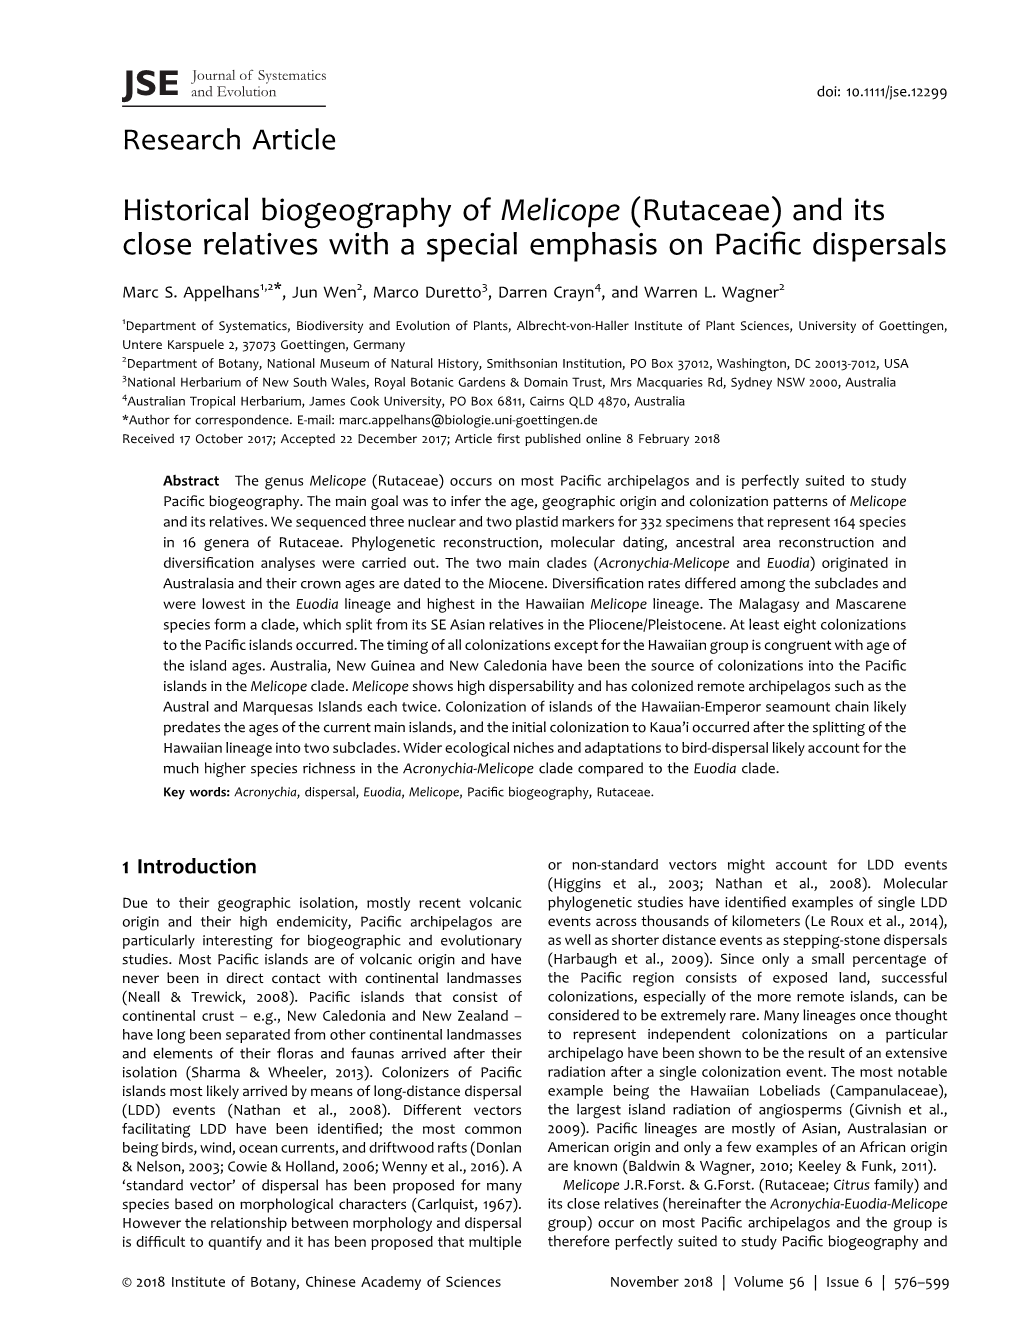 Historical Biogeography of Melicope (Rutaceae) and Its Close Relatives with a Special Emphasis on Paciﬁc Dispersals